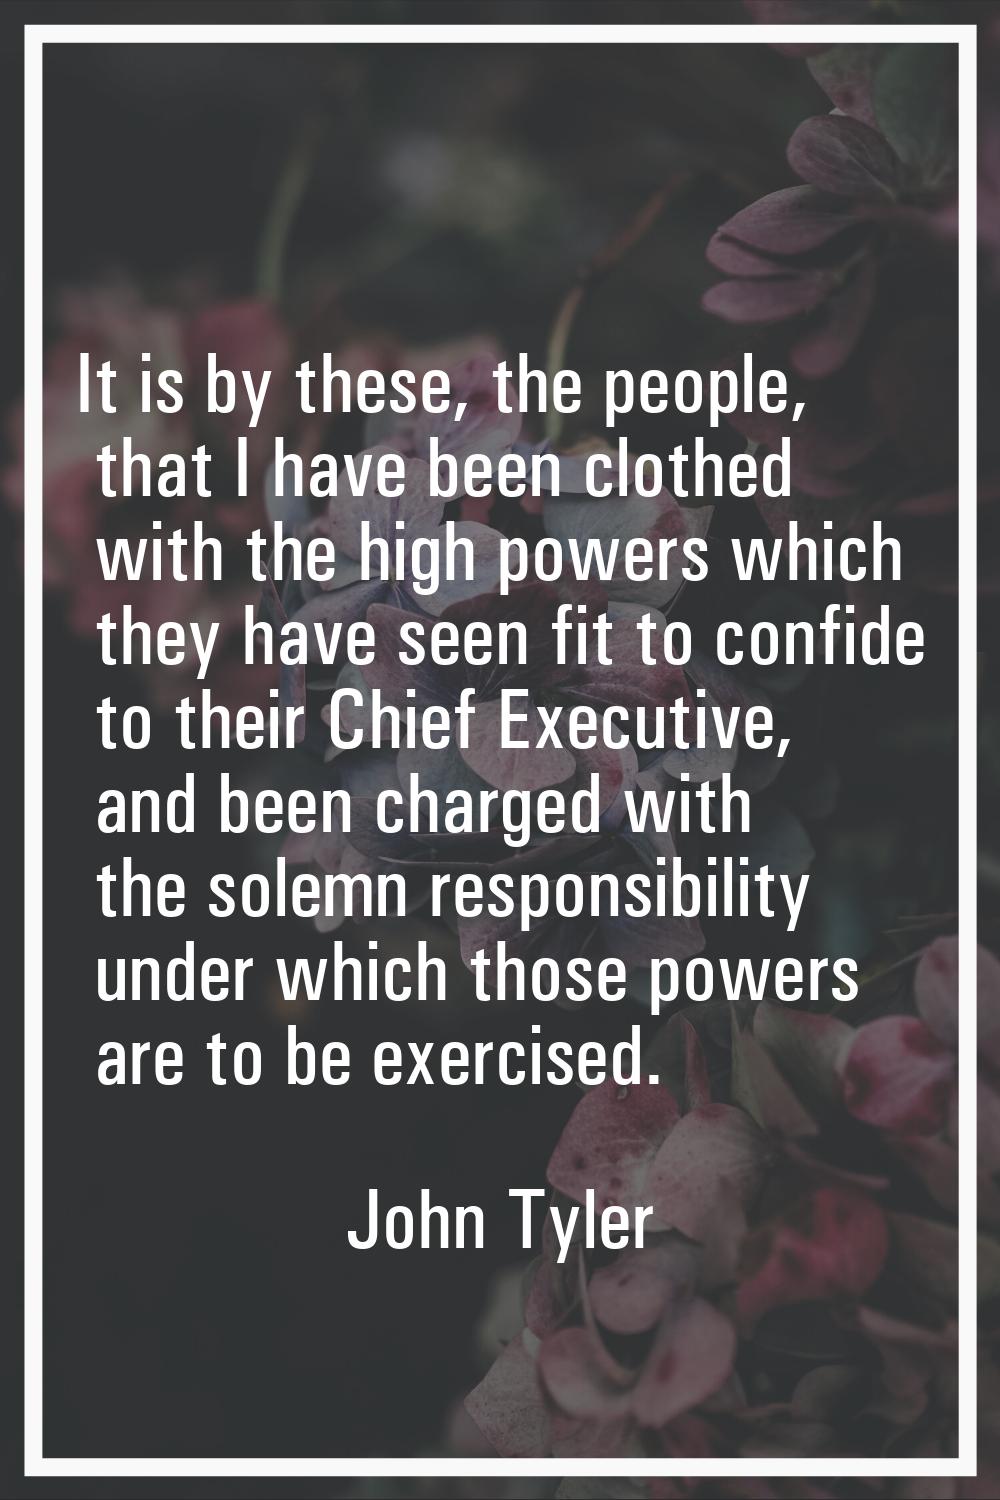 It is by these, the people, that I have been clothed with the high powers which they have seen fit 